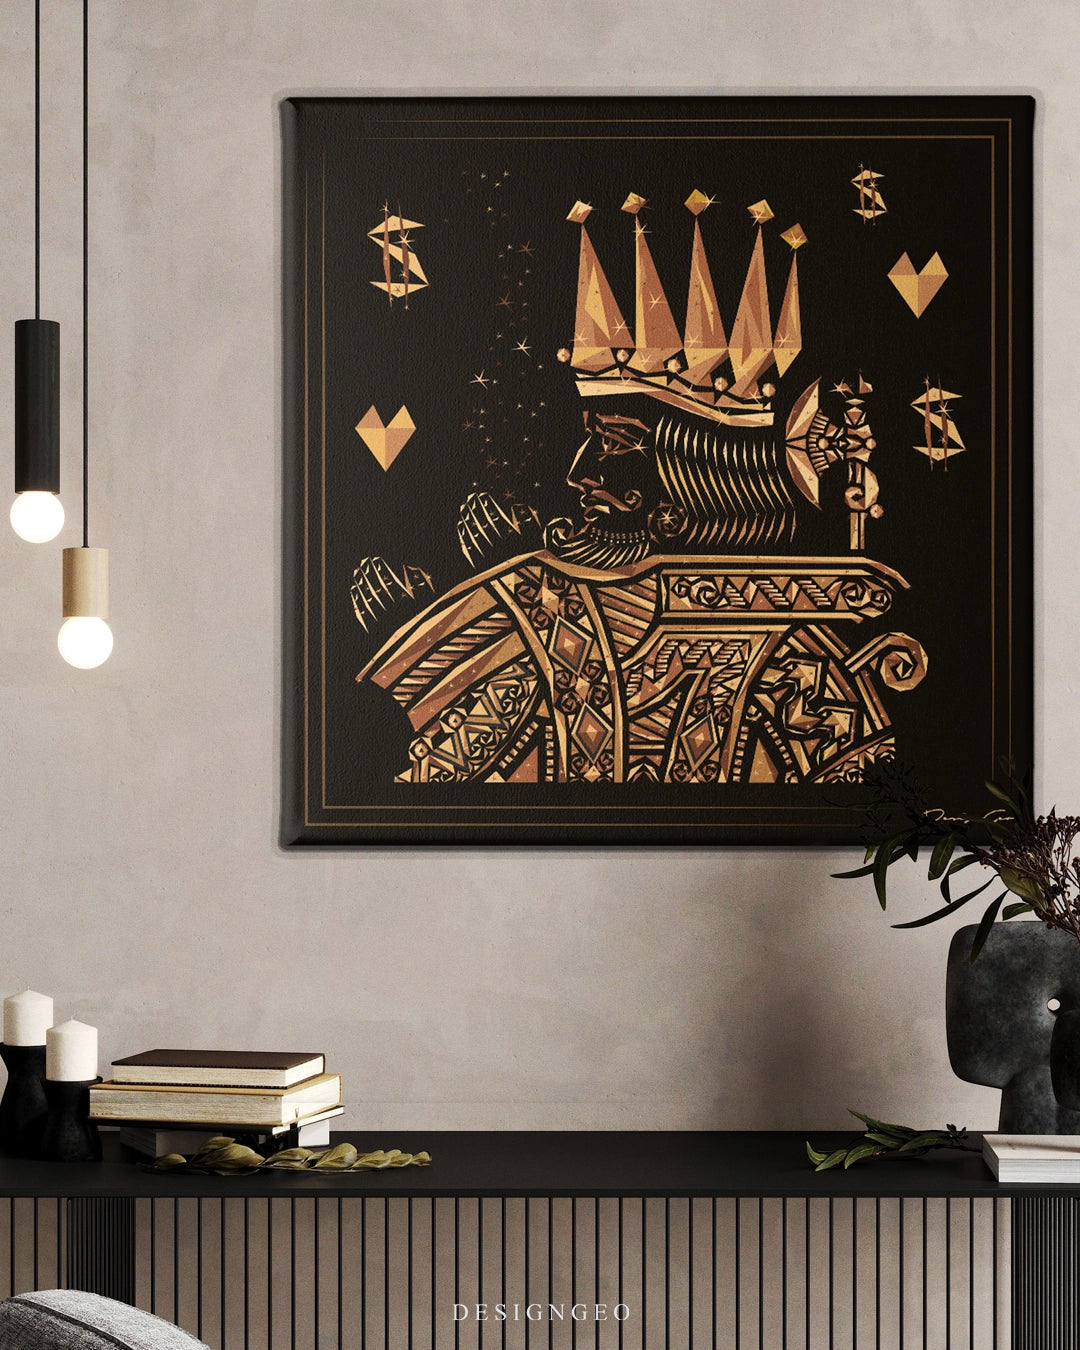 King Of Fortune  Art Square Canvas Print by DesignGeo